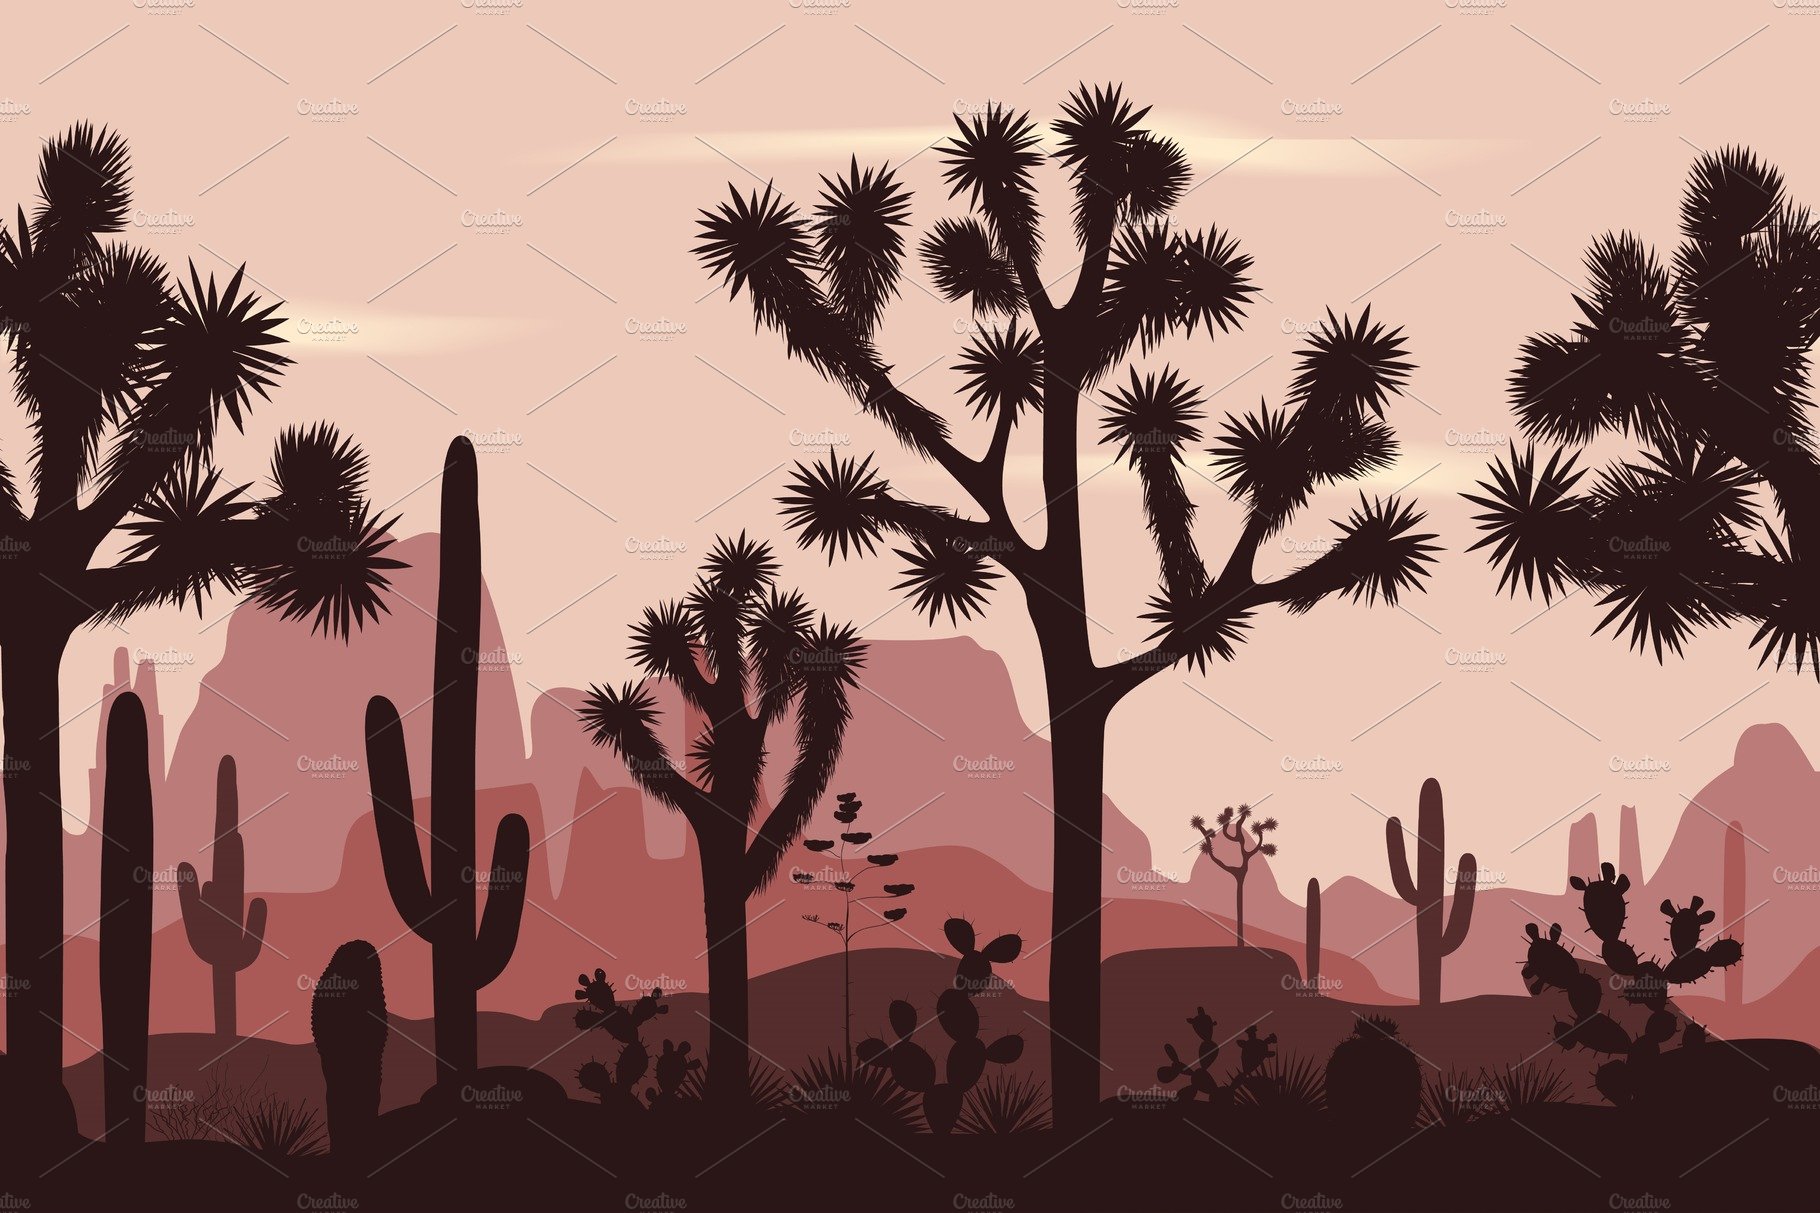 Desert scene with cactus trees and mountains in the background.